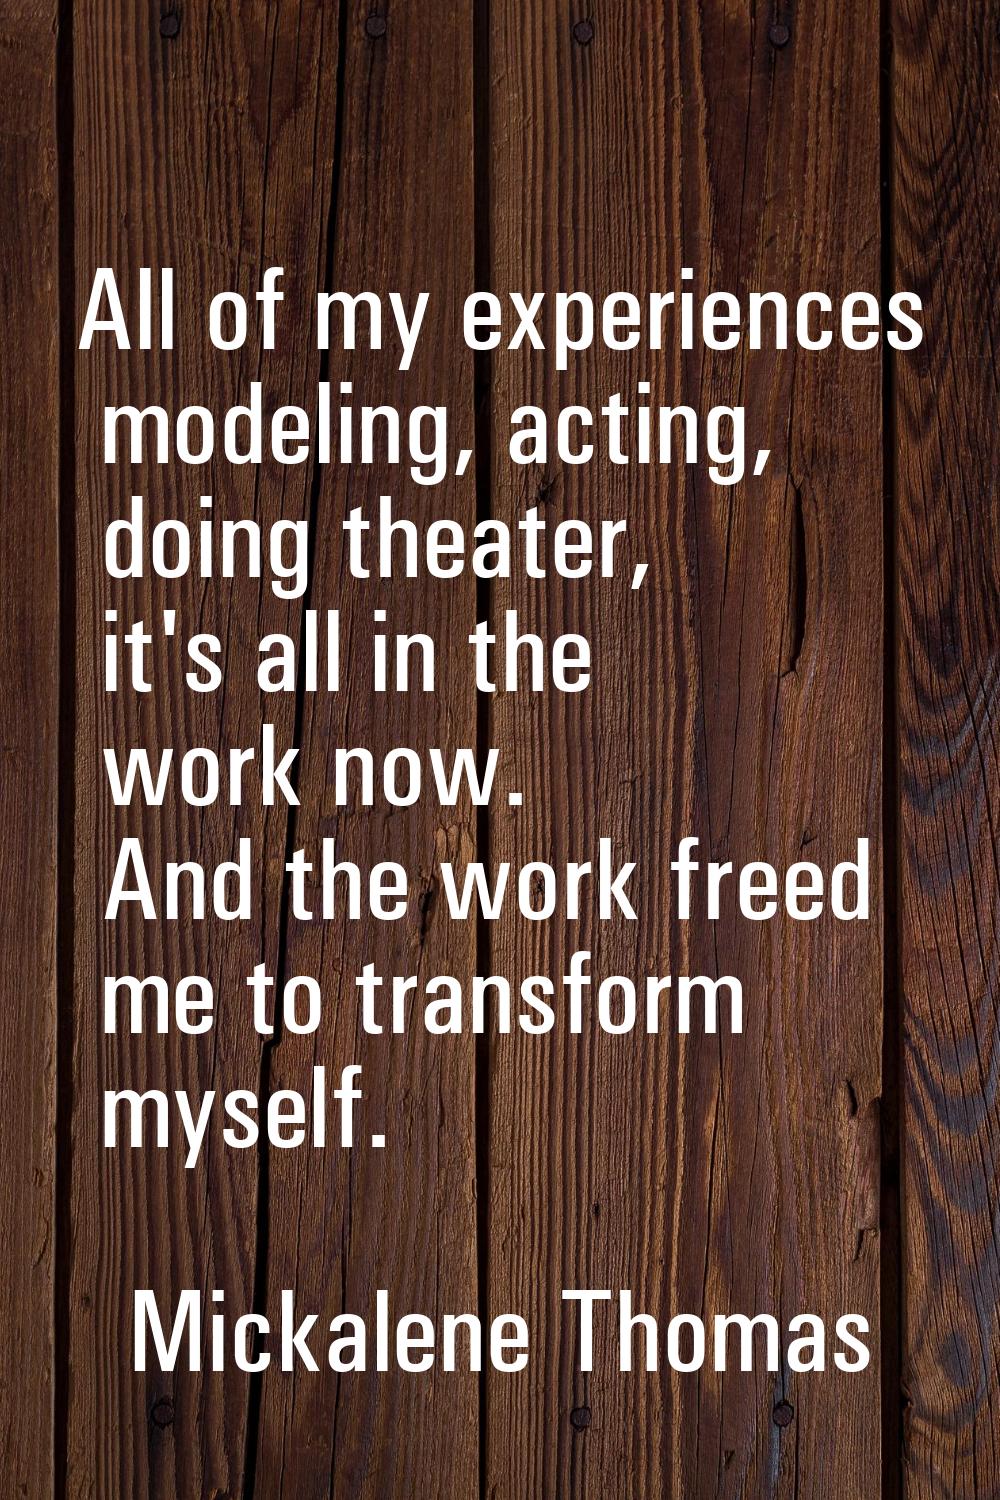 All of my experiences modeling, acting, doing theater, it's all in the work now. And the work freed